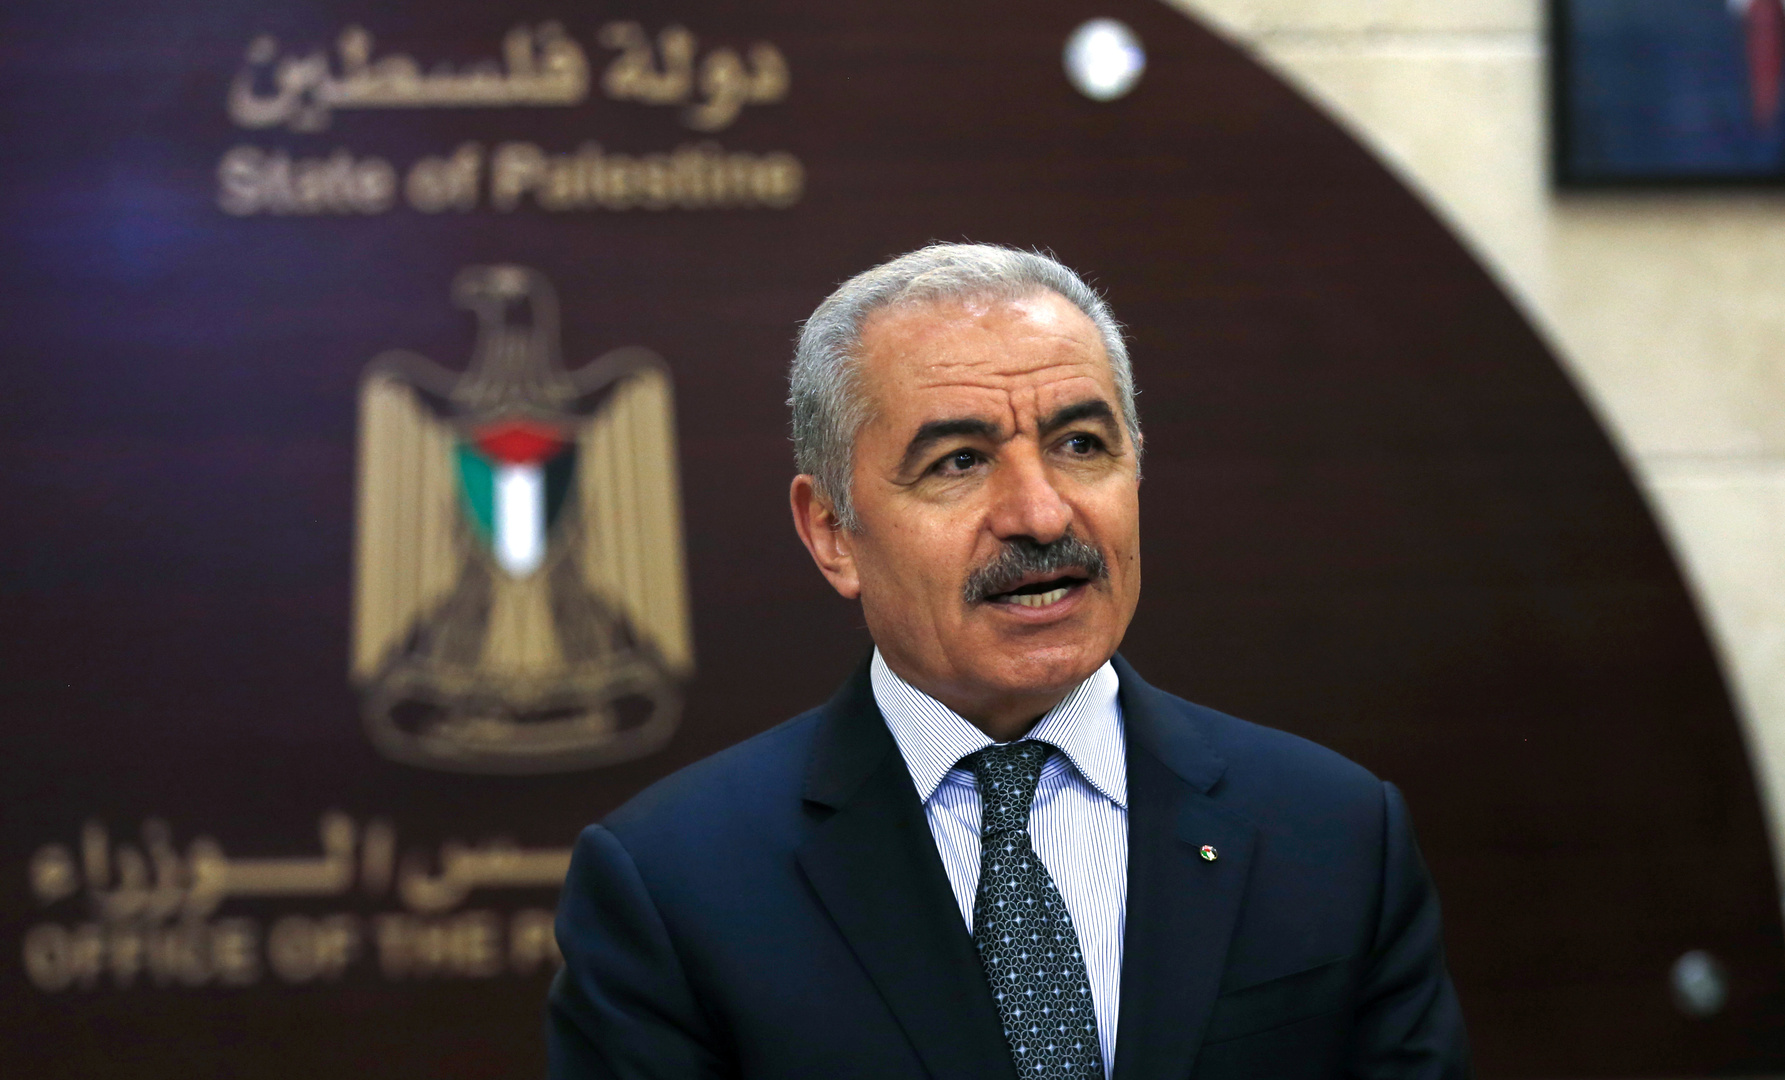 Shtayyeh calls on Europe to pressure Israel to allow holding of elections in Jerusalem